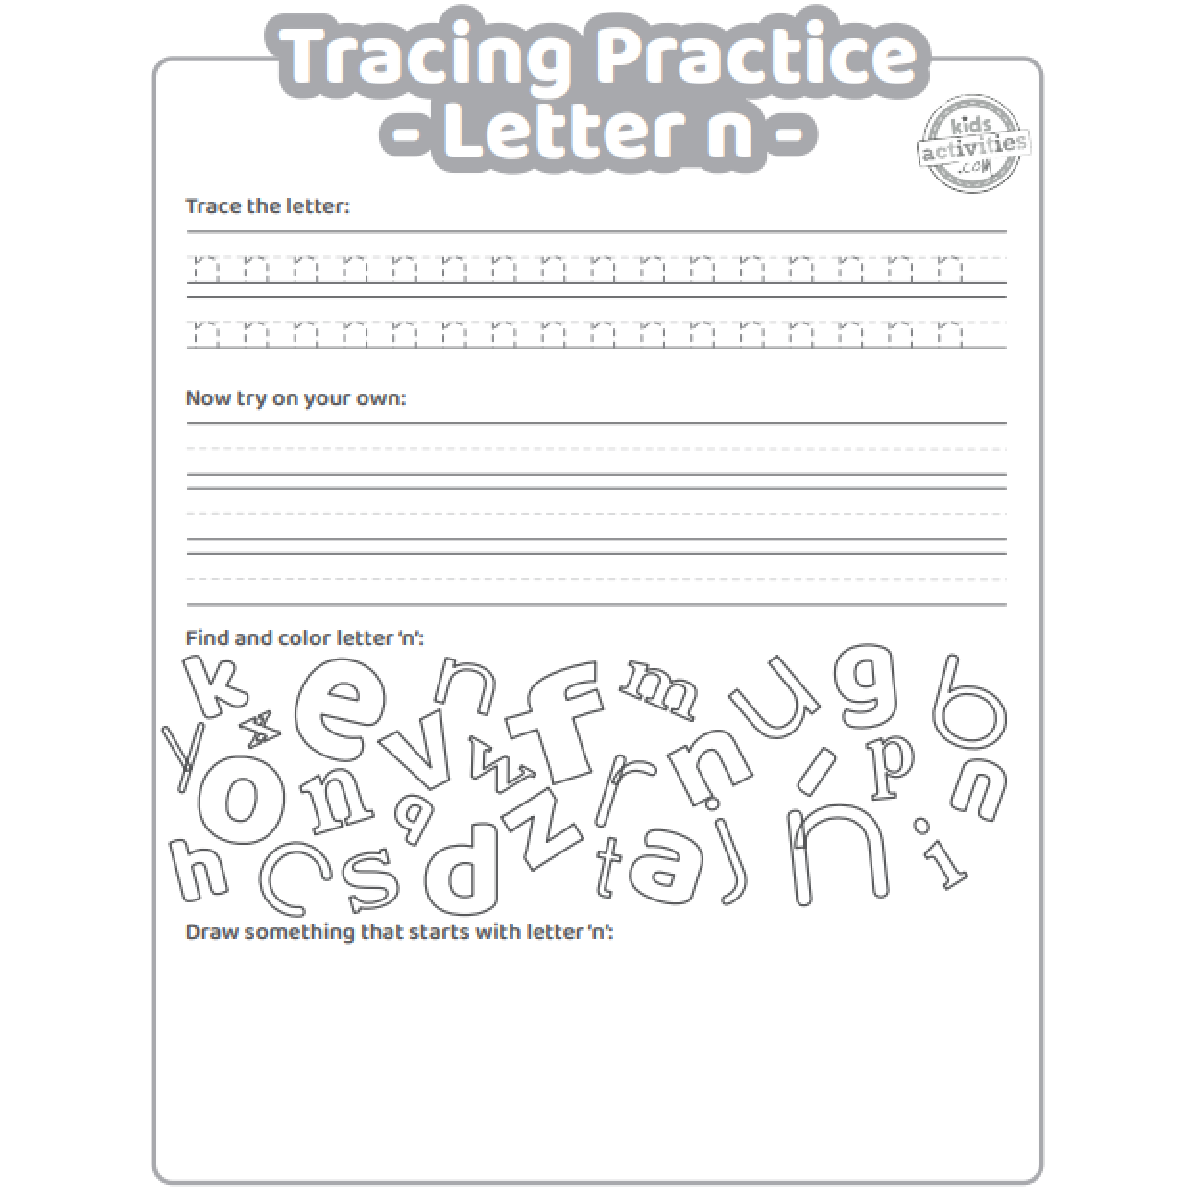 Free letter n practice worksheet trace it write it find it draw kids activities blog